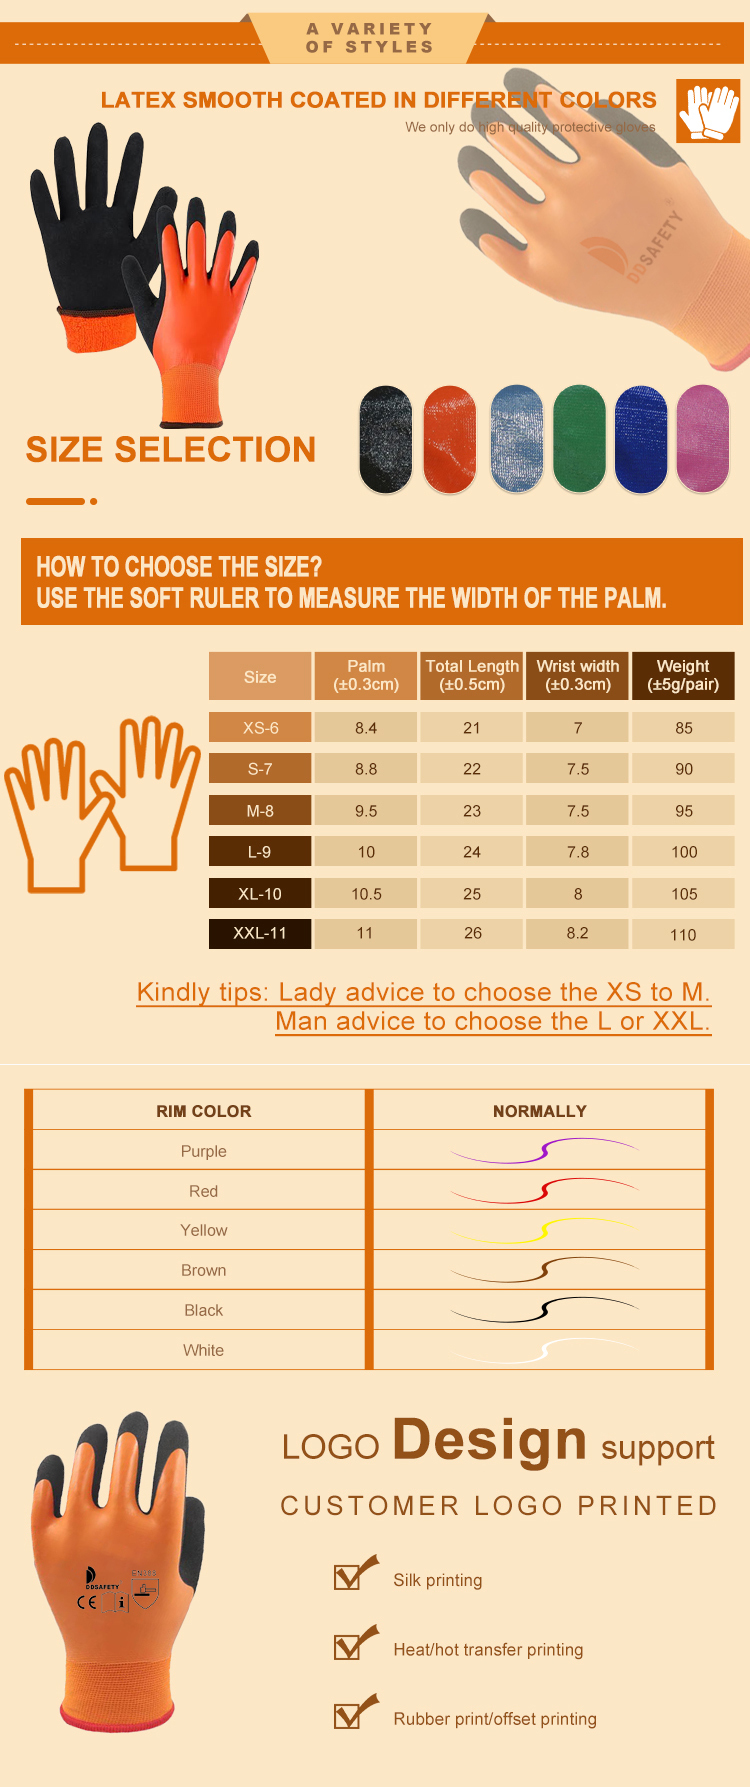 Waterproof Winter Work Gloves for Men and Women,Insulated Work Gloves Cold Weather,Warm Freezer Gloves- DNL521 Waterproof Winter Work Gloves for Men and Women,Insulated Work Gloves Cold Weather,Warm Freezer Gloves- DNL521 Waterproof Work Gloves,waterproof gloves,Freezer Gloves